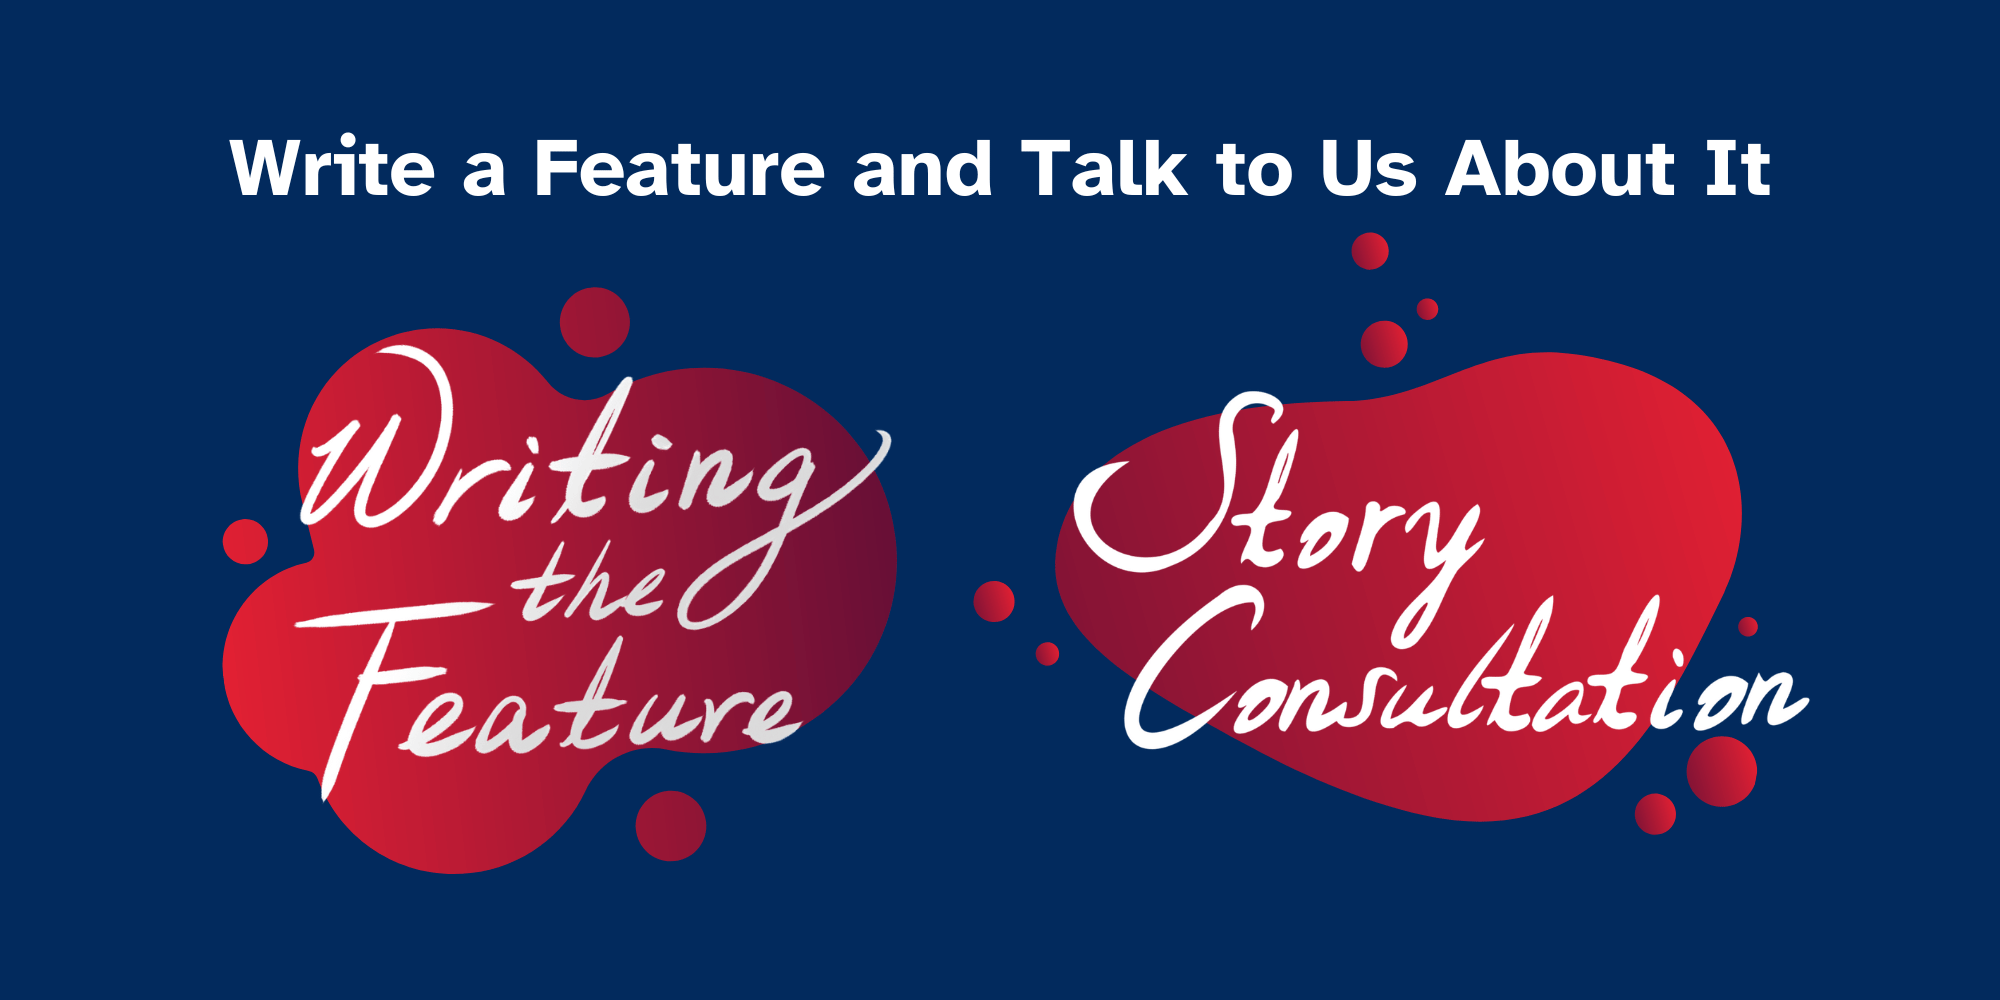 Write a Feature and Talk to Us About It. Writing the Feature and Story Consultation